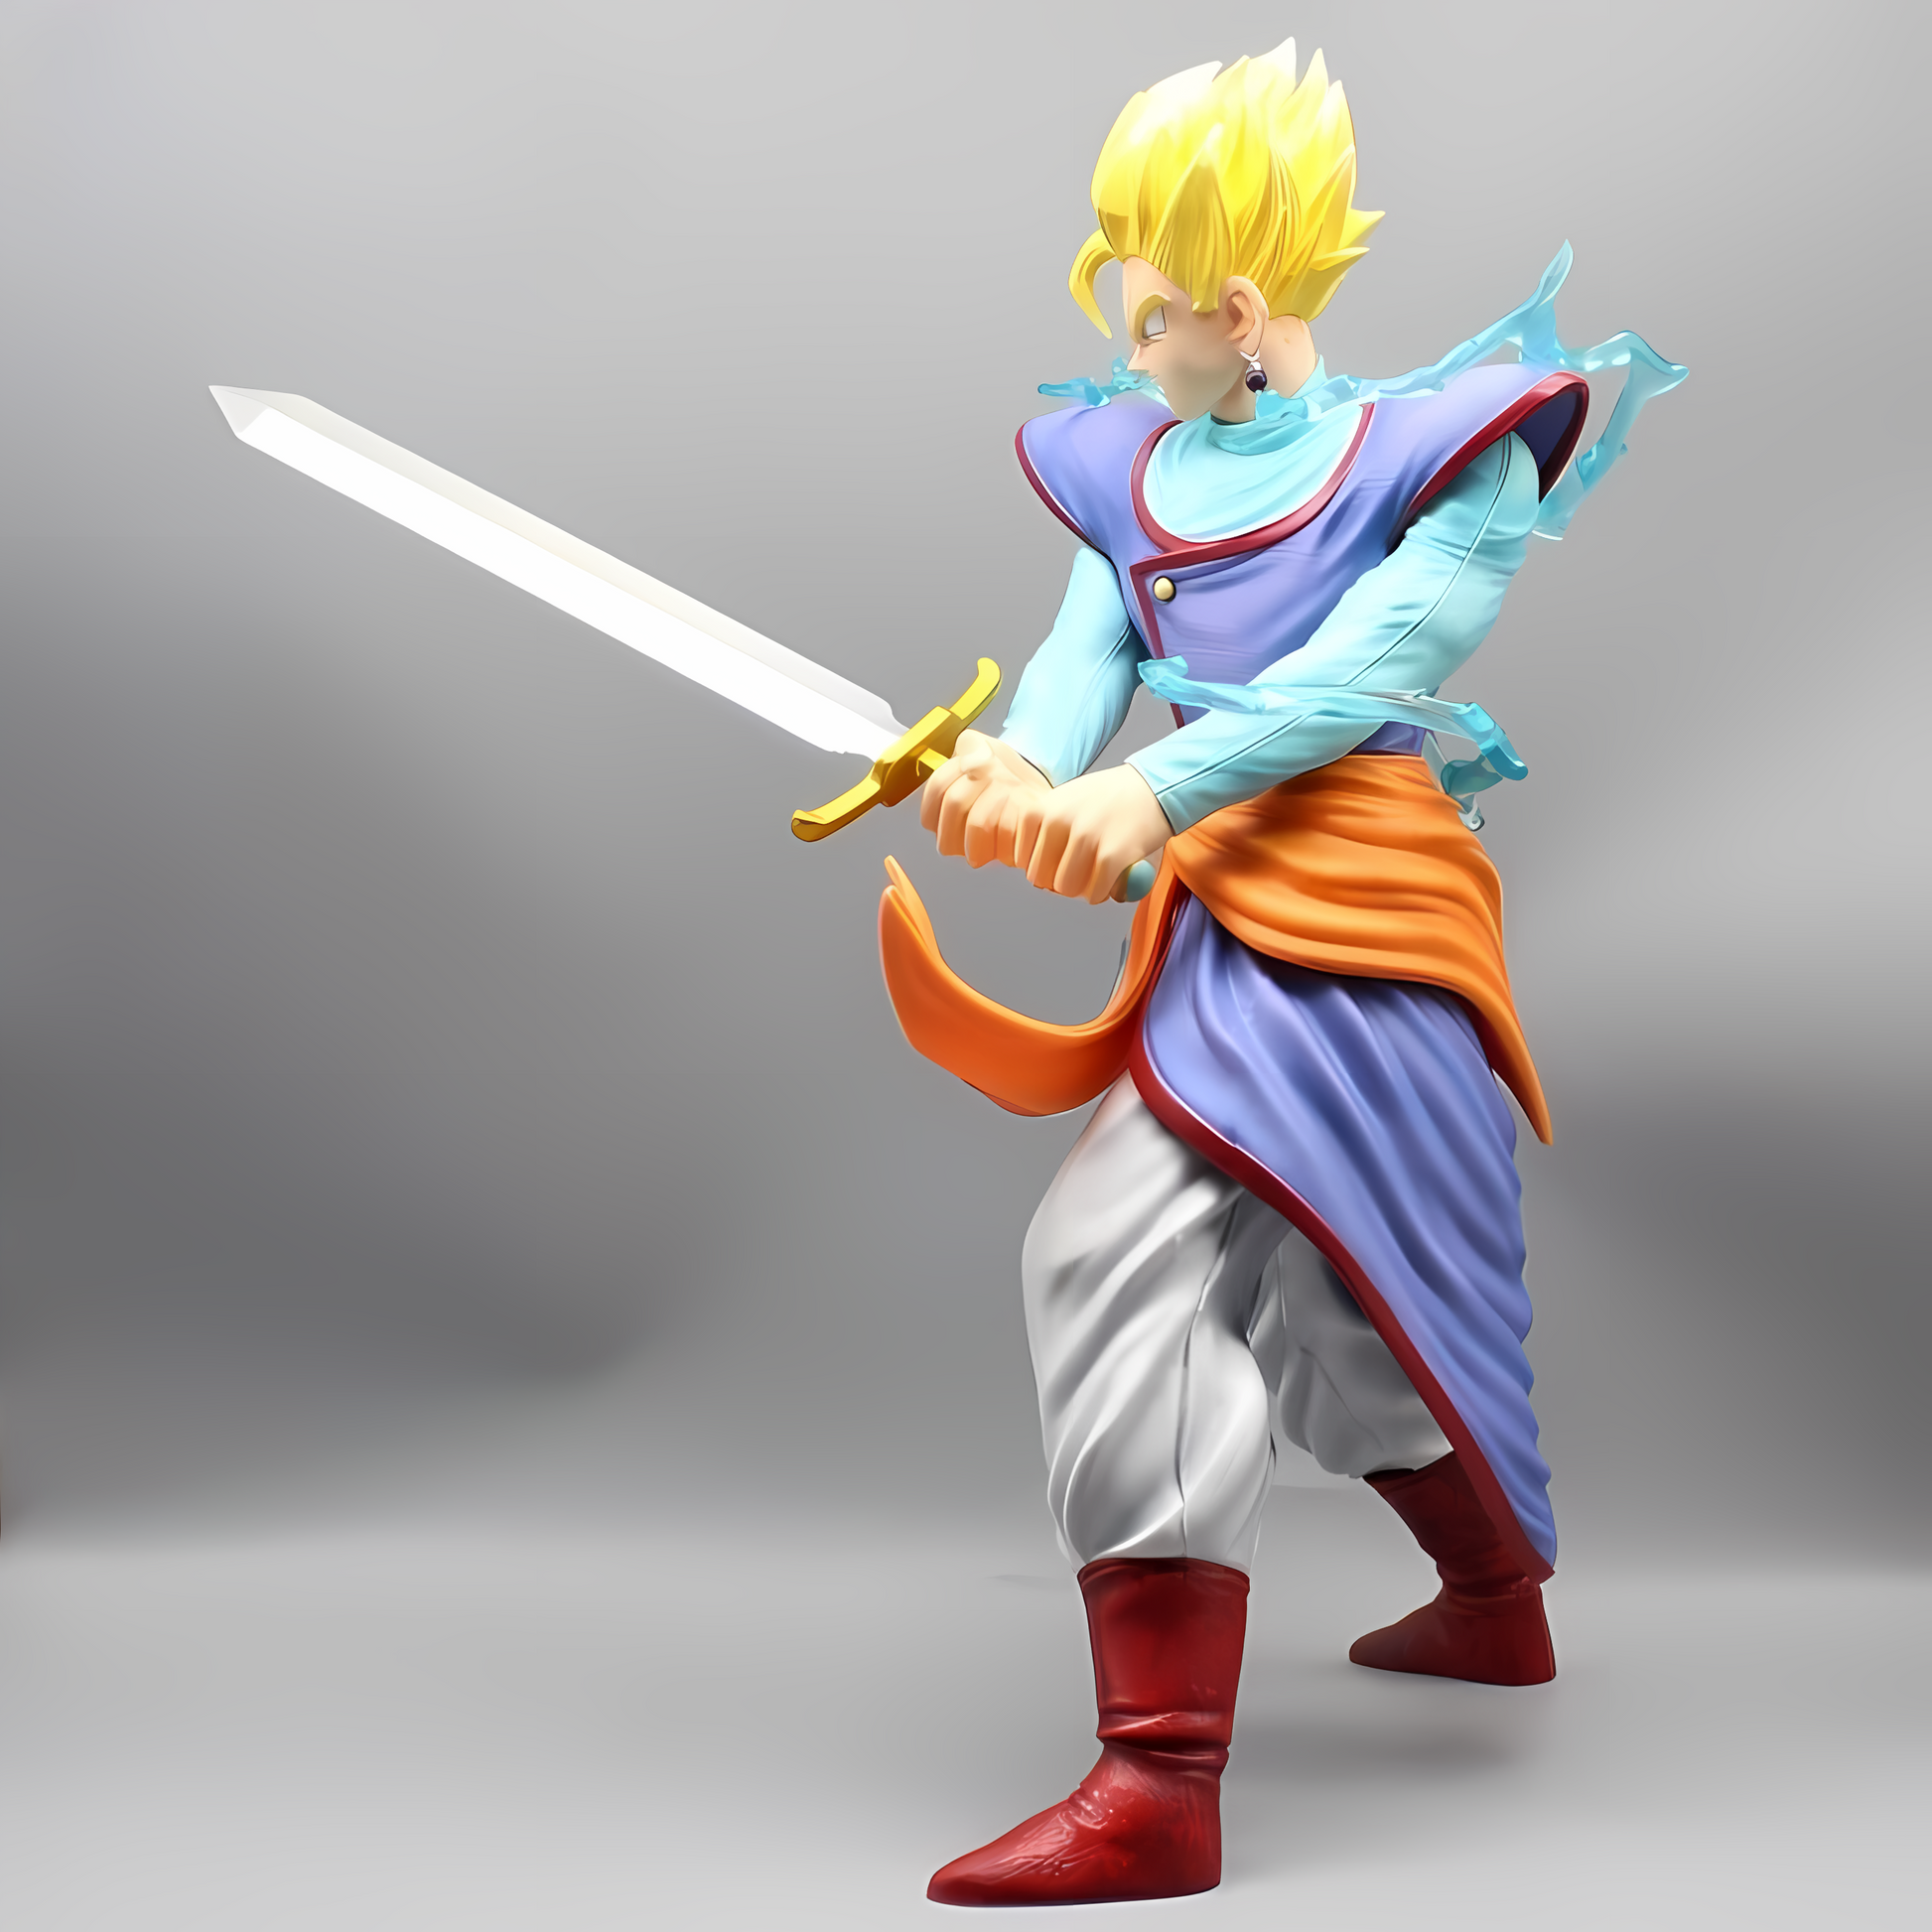 Collectible figure of Legendary Super Saiyan Gohan in a poised stance with a silver sword, from the Dragon Ball series, against a grey background.